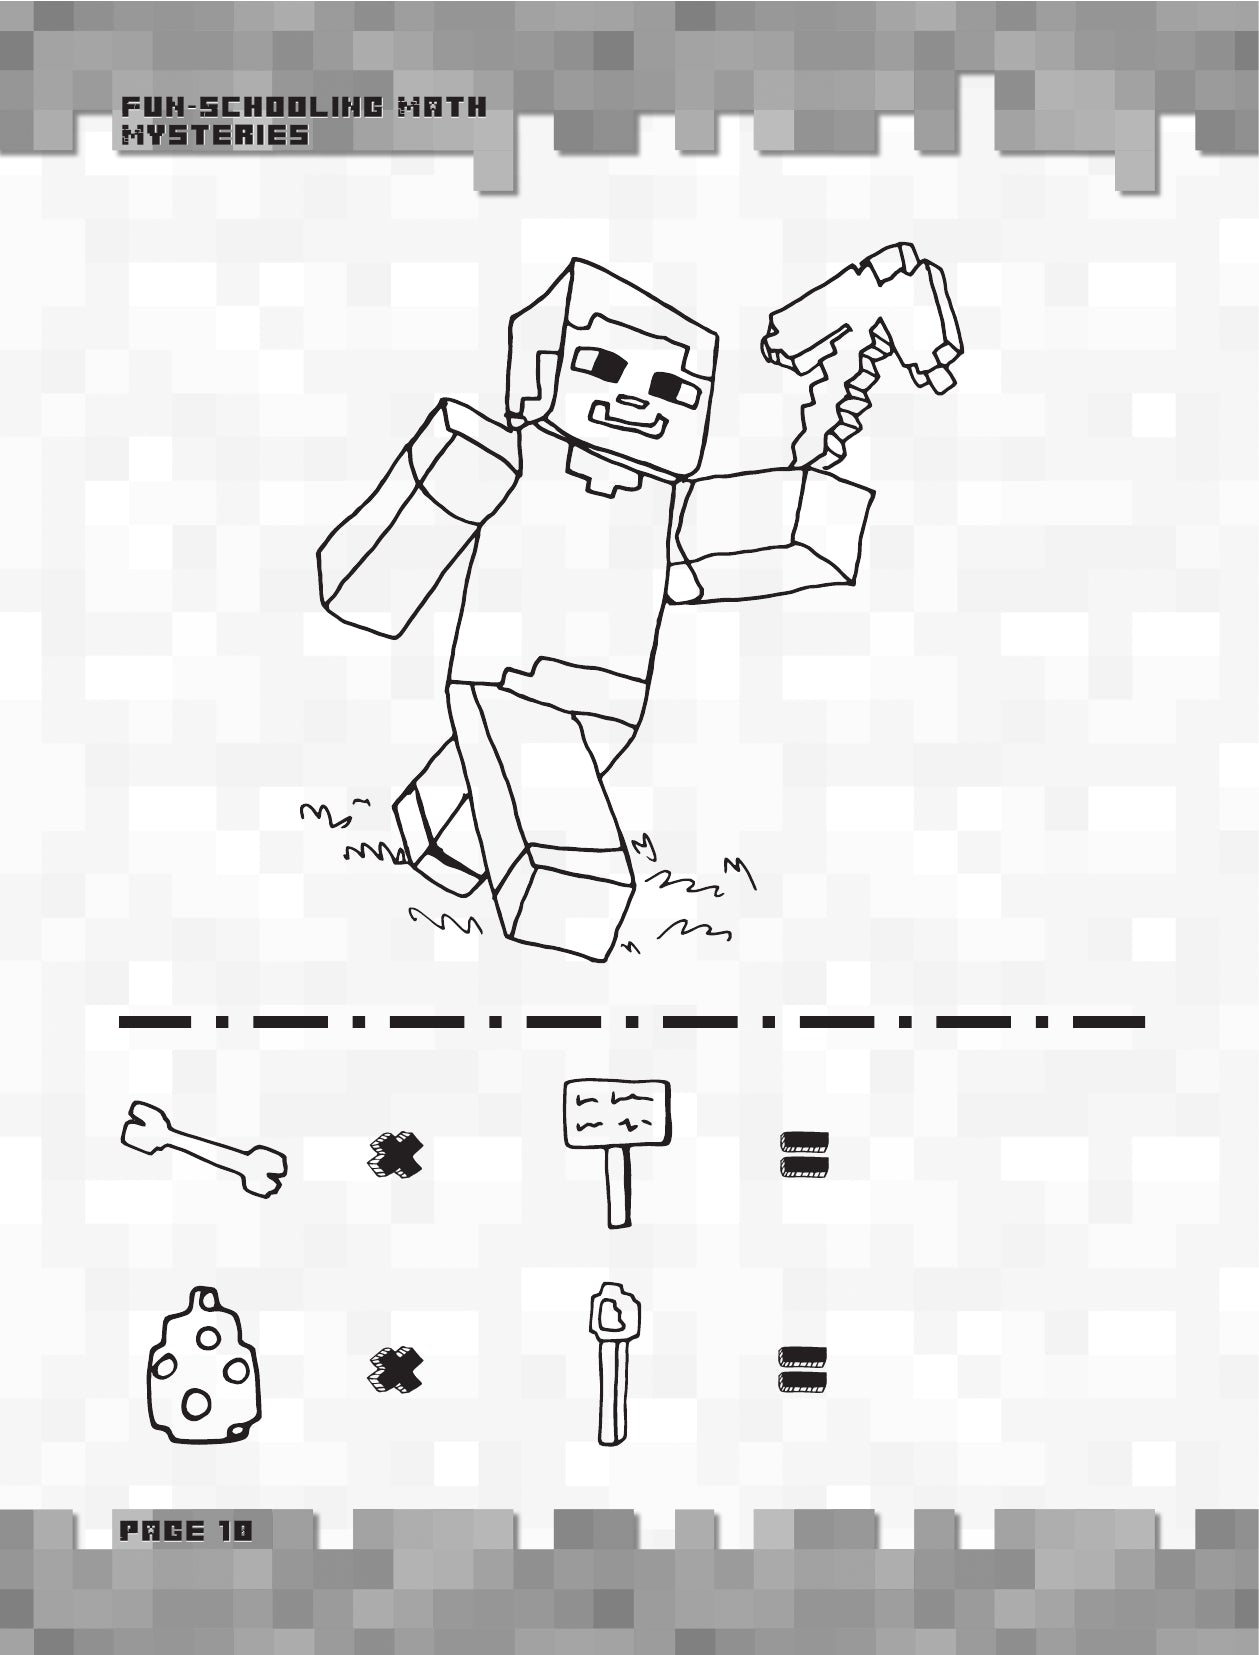 (Age 7+) Fun-Schooling Math Mysteries with Minecraft